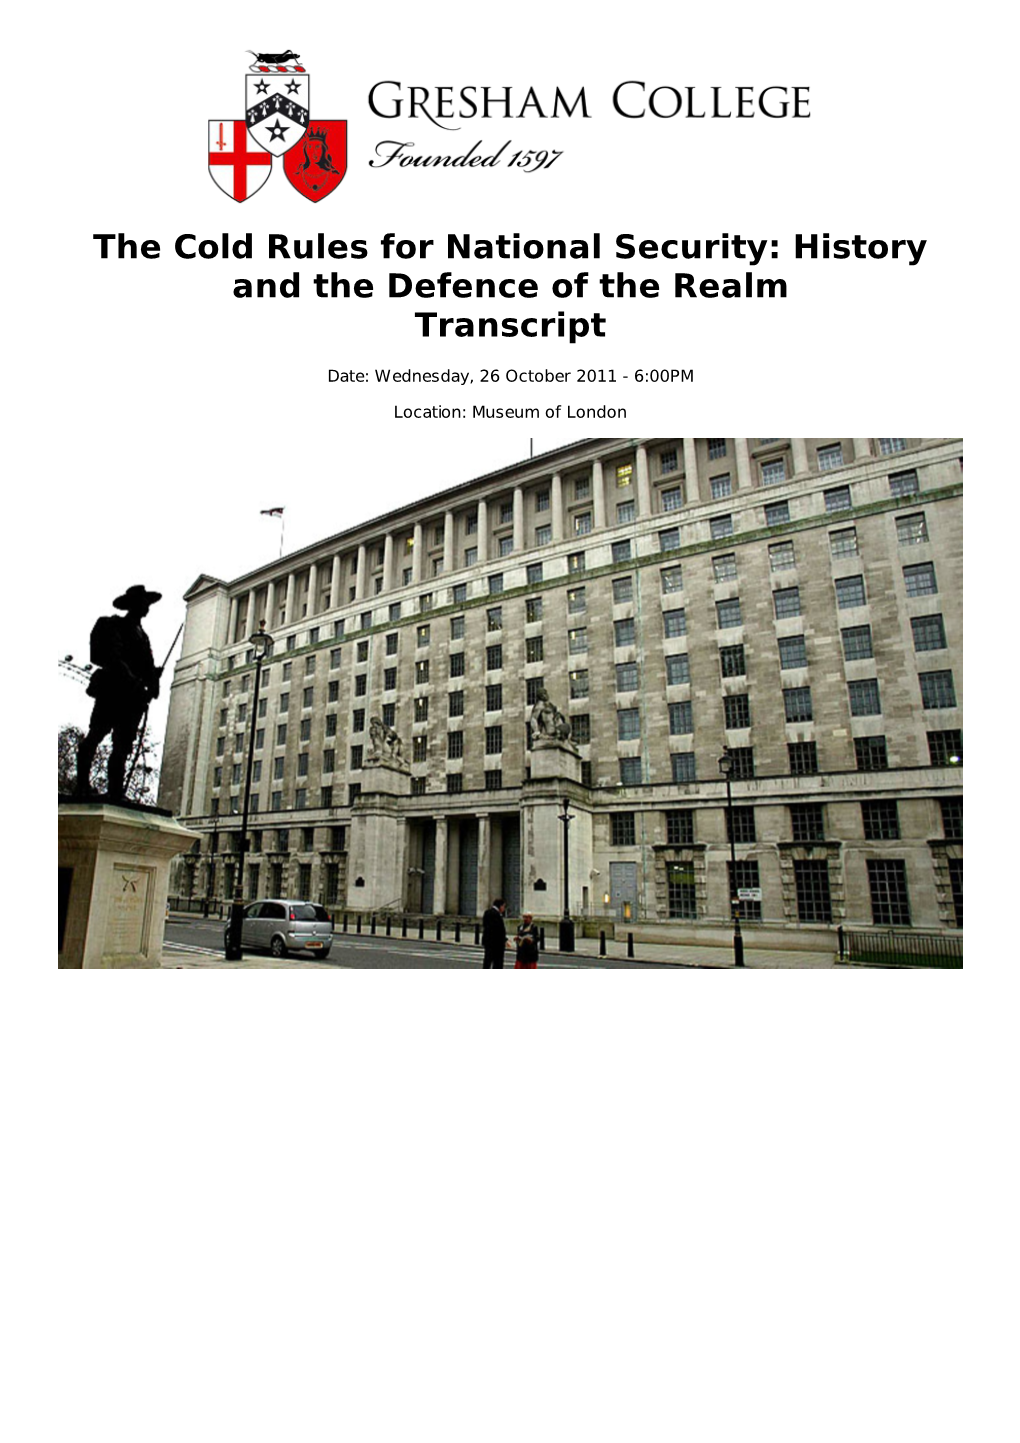 The Cold Rules for National Security: History and the Defence of the Realm Transcript